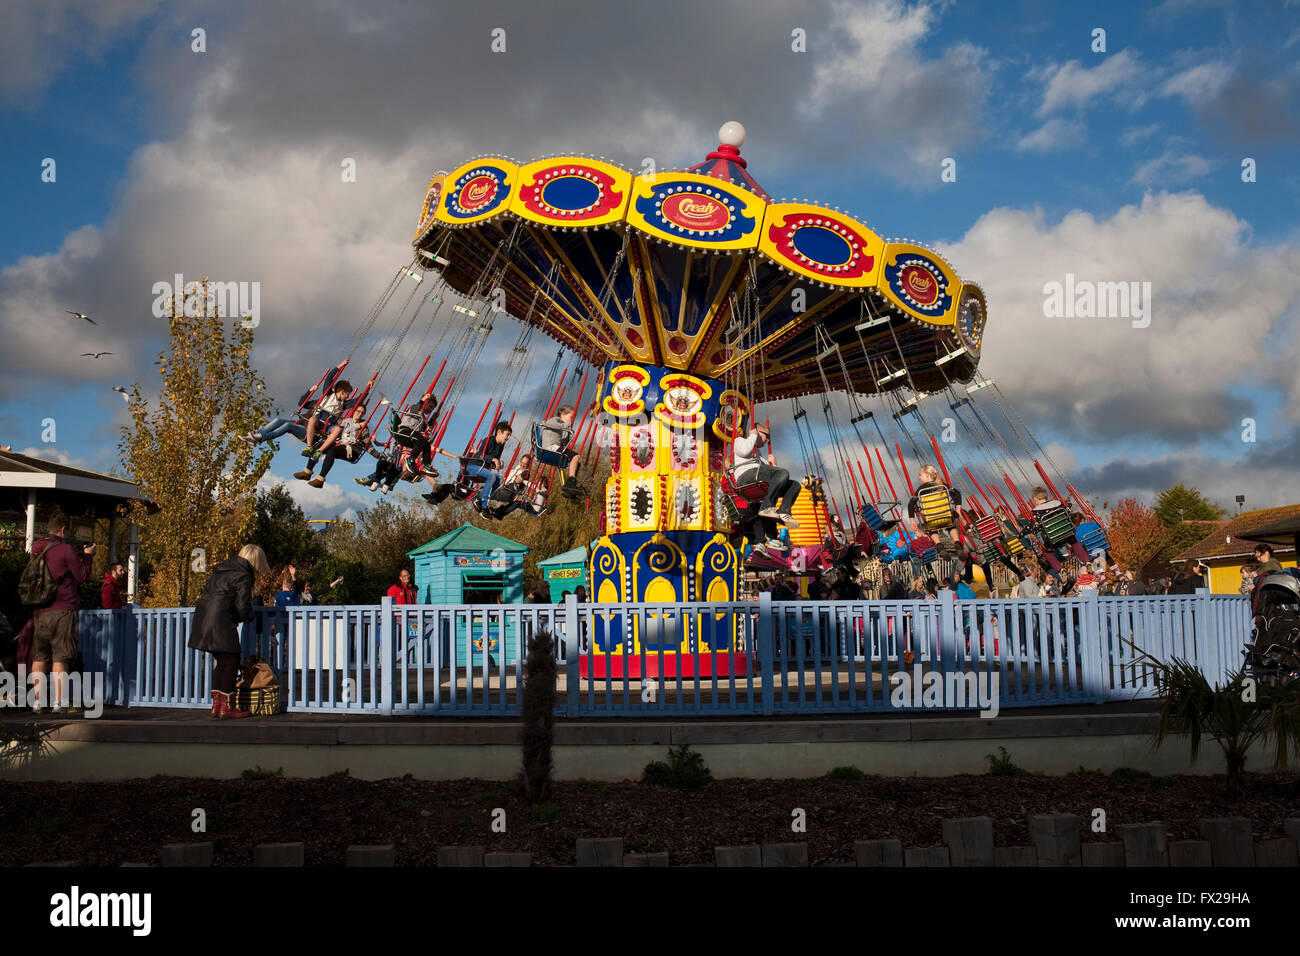 swing chair at a fair enclosed within a fence Stock Photo